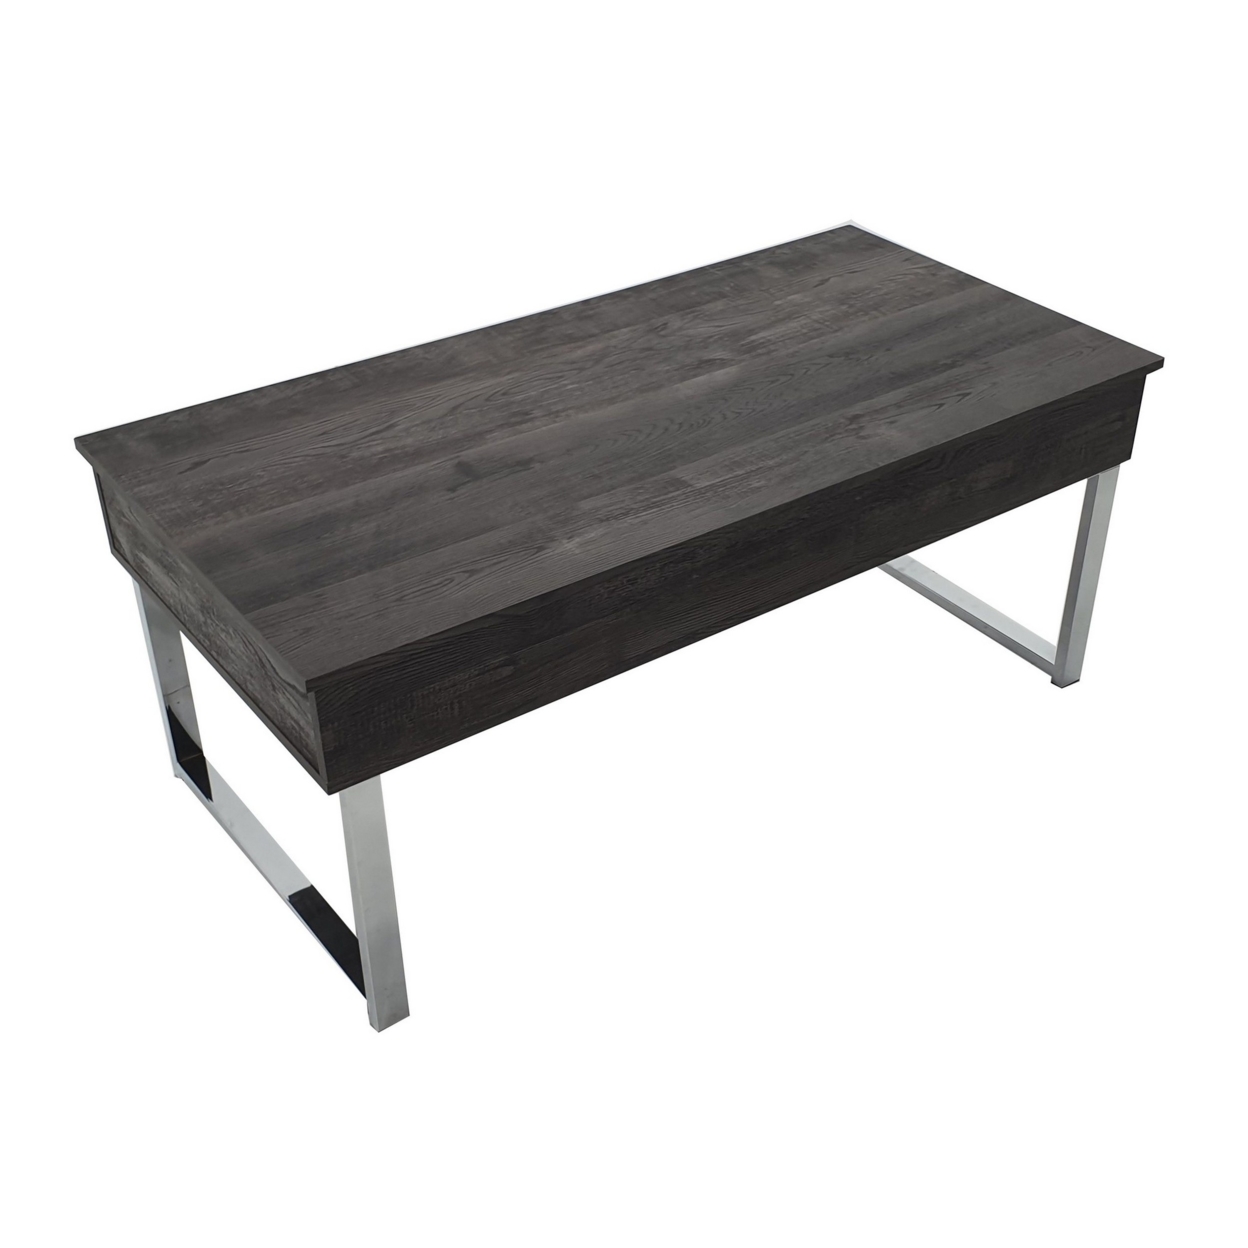 47 Inch Lift Top Coffee Table, Chrome Base, Distressed Gray, Rectangular